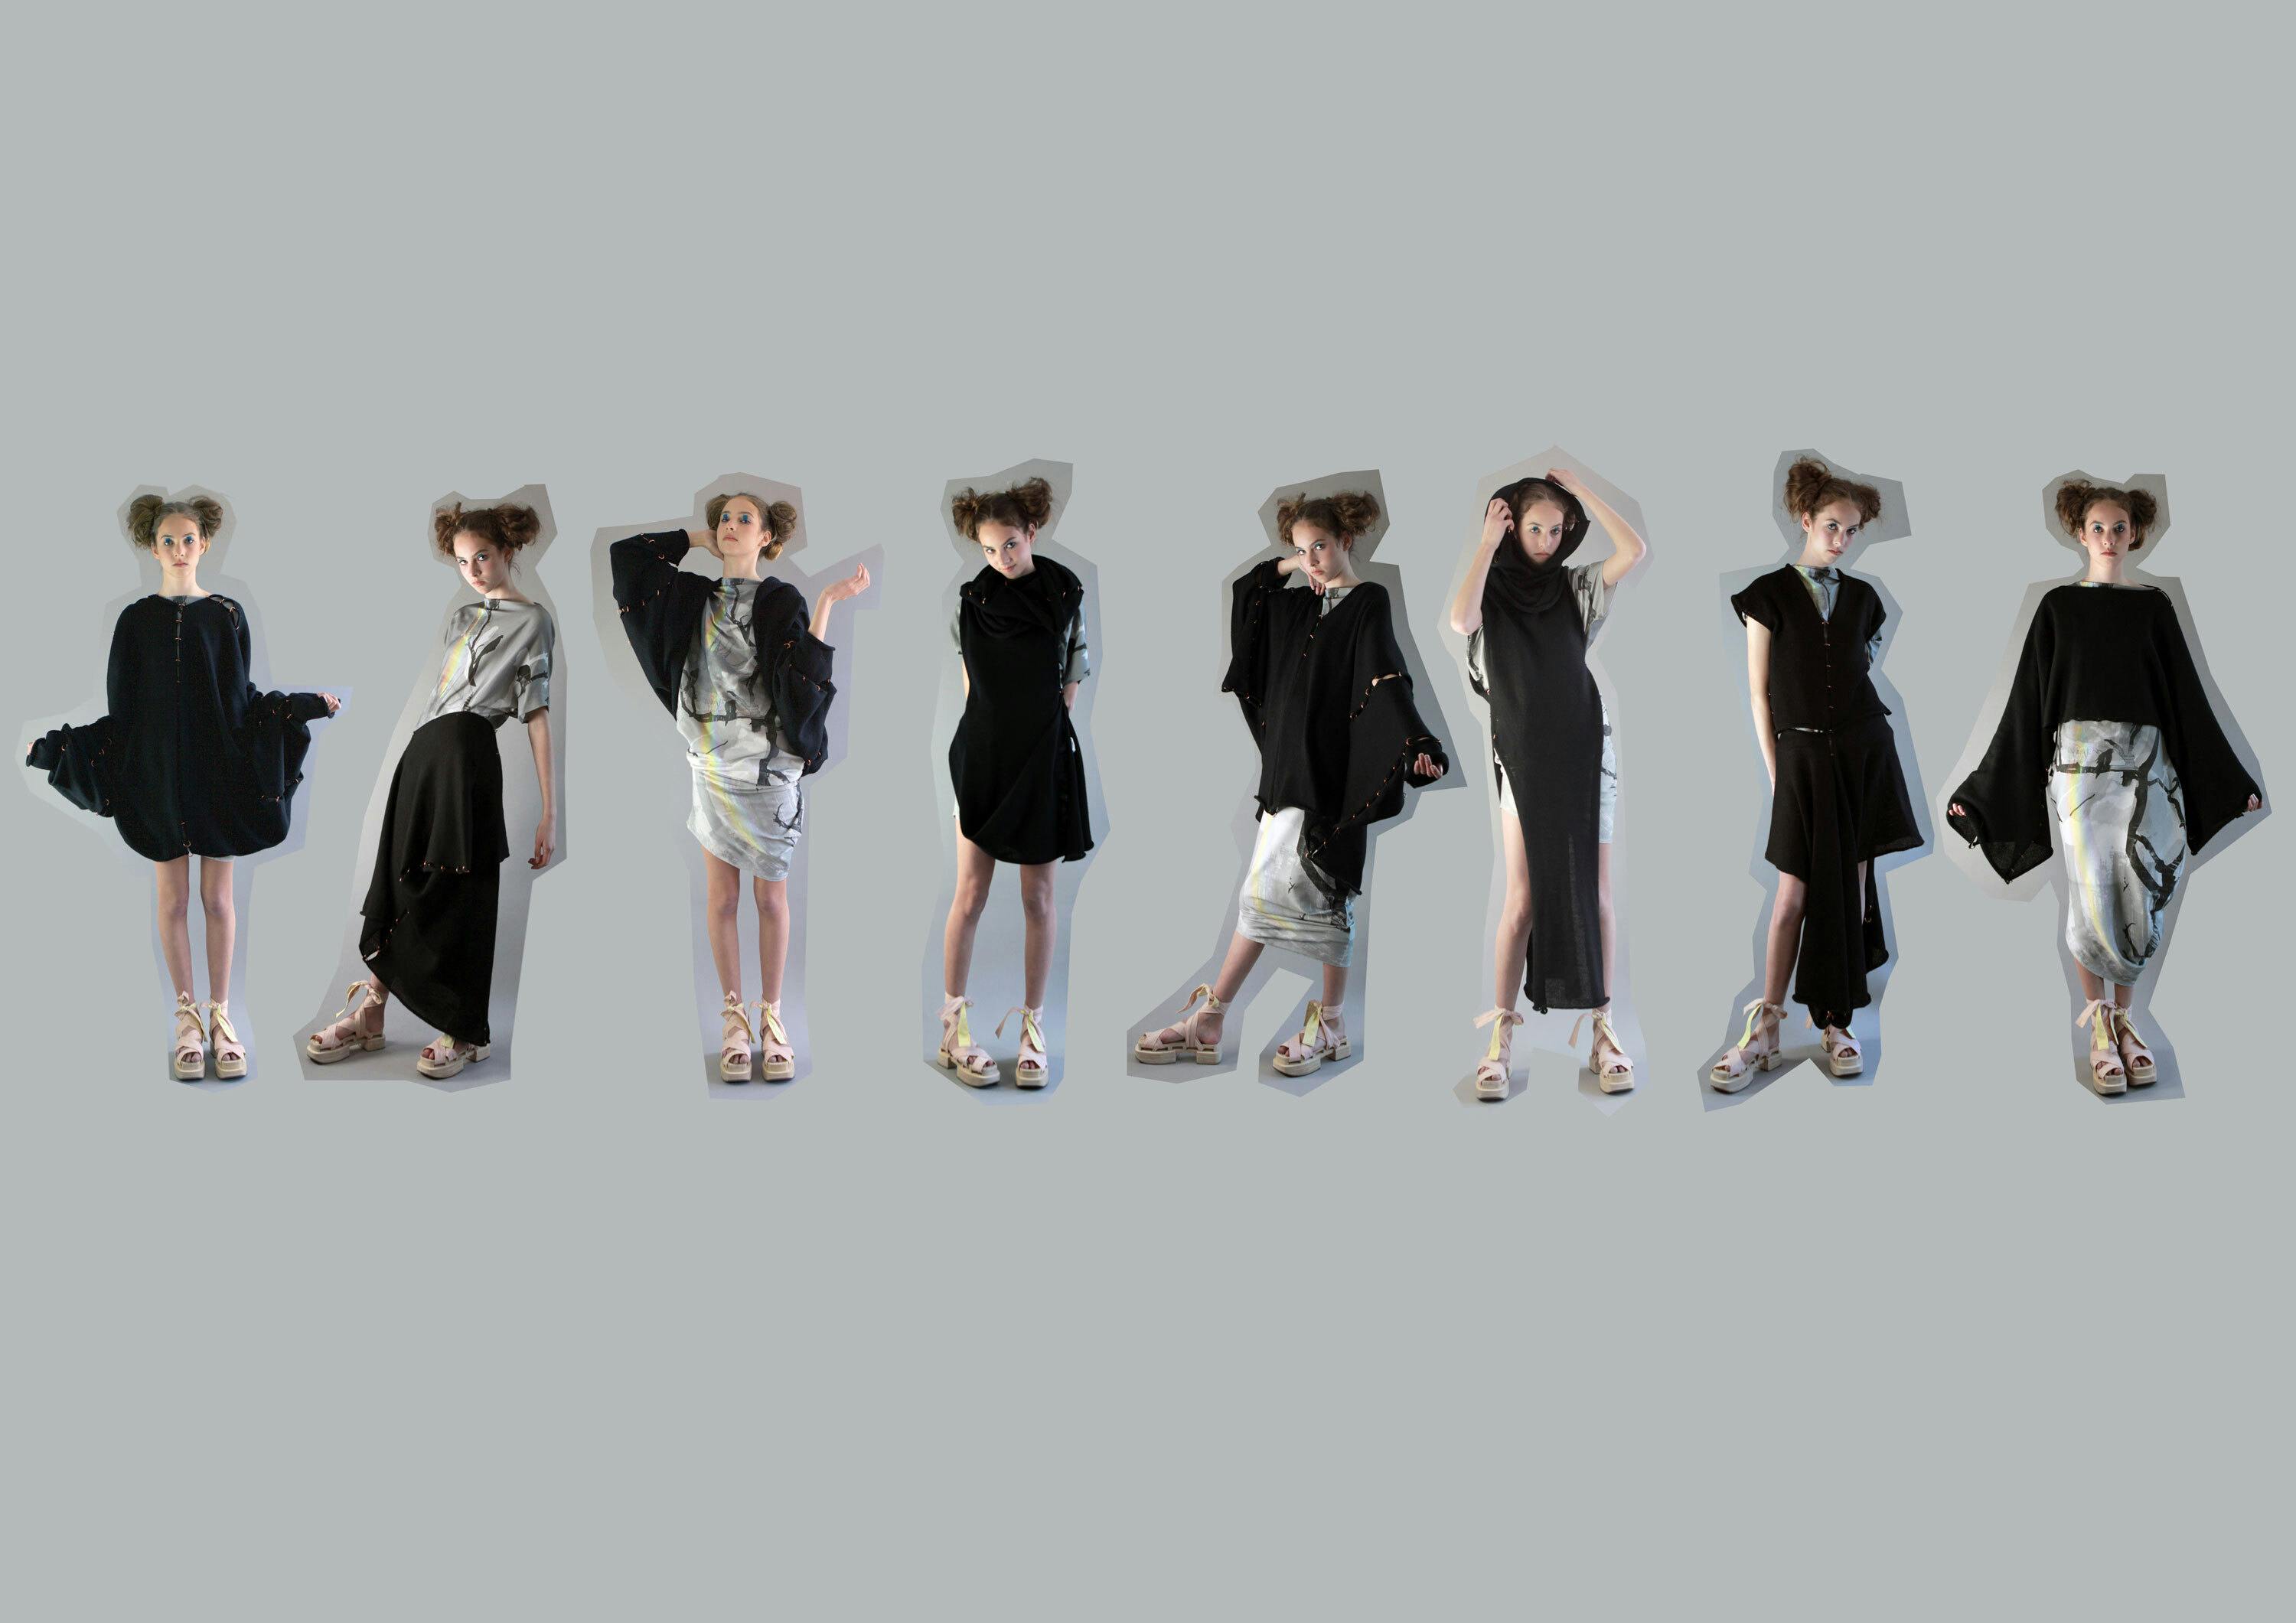 Image shows multiple images of the same woman dressed in monochromatic dresses and outfits from Eve Copper's collection